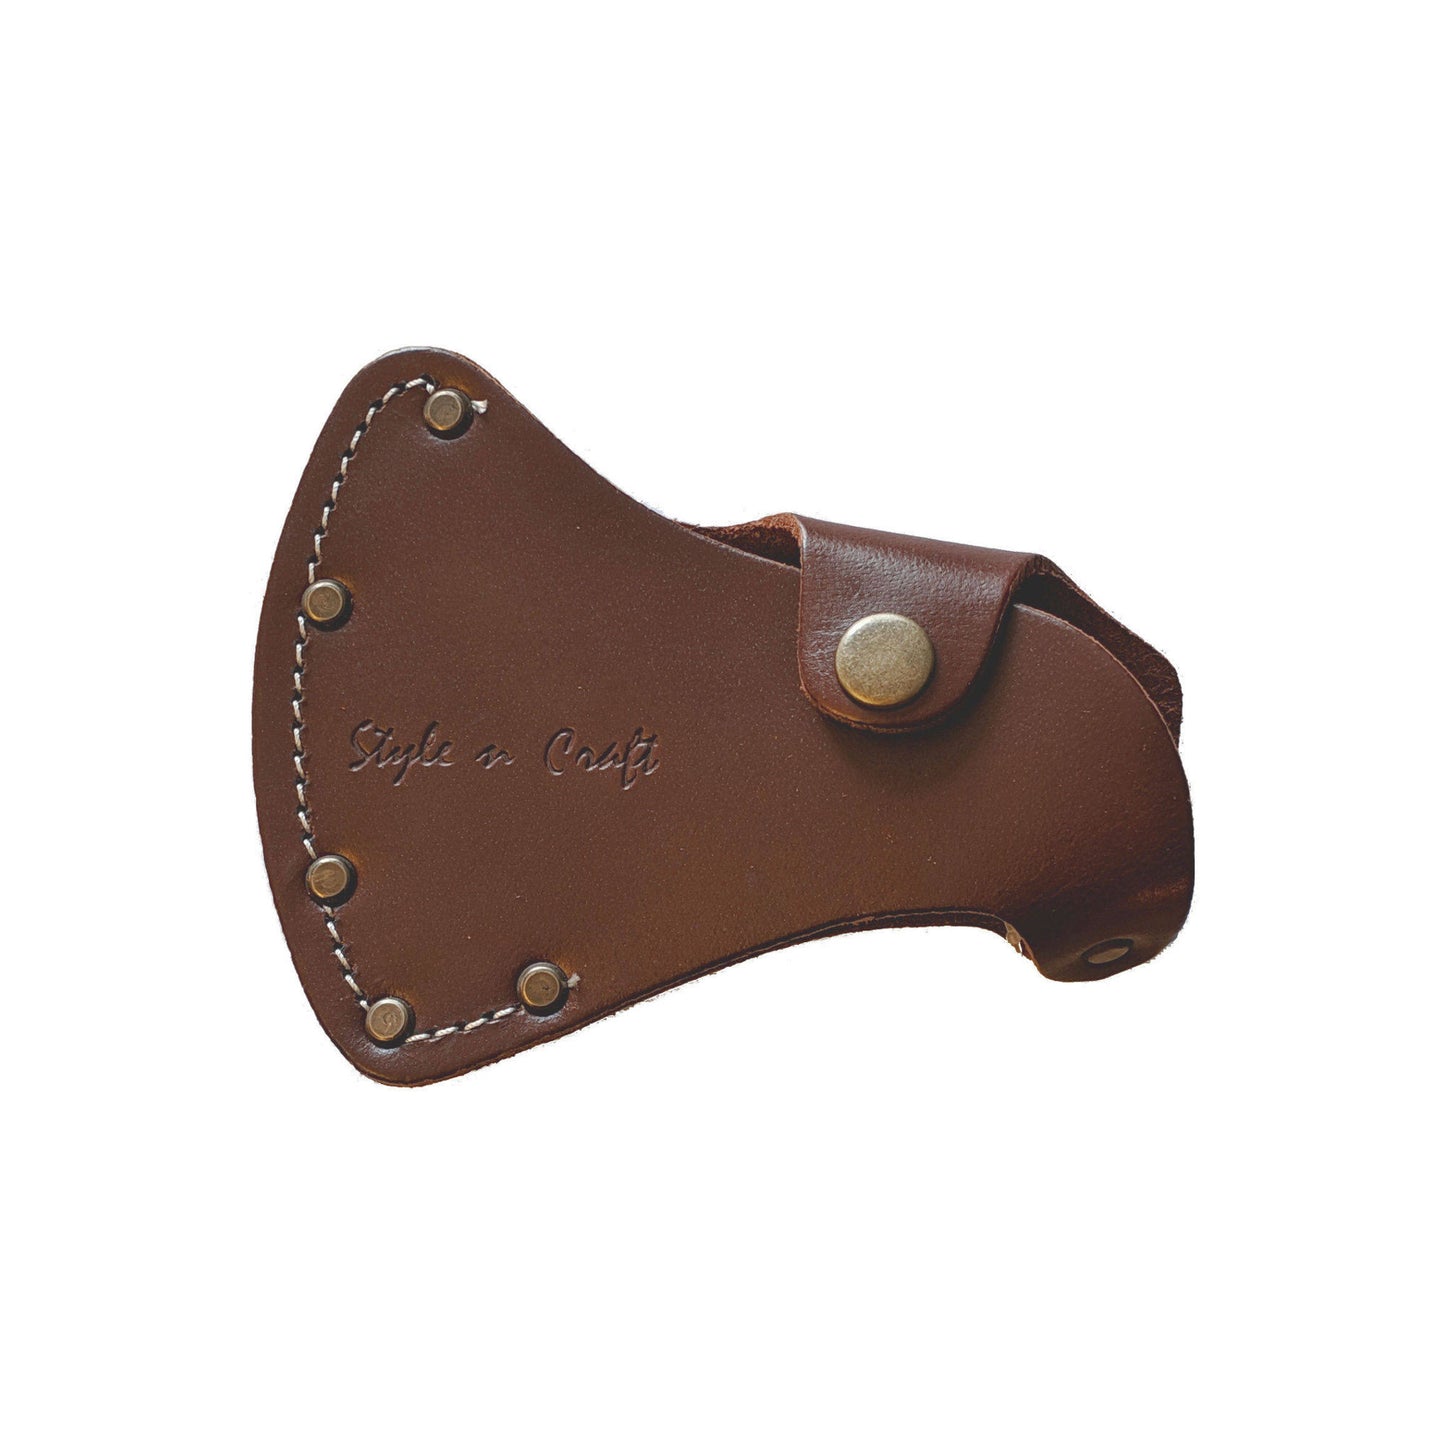 Style n Craft 98026 - Sportsman's Axe Sheath / Axe Cover in Heavy Full Grain Leather in Dark Tan Color